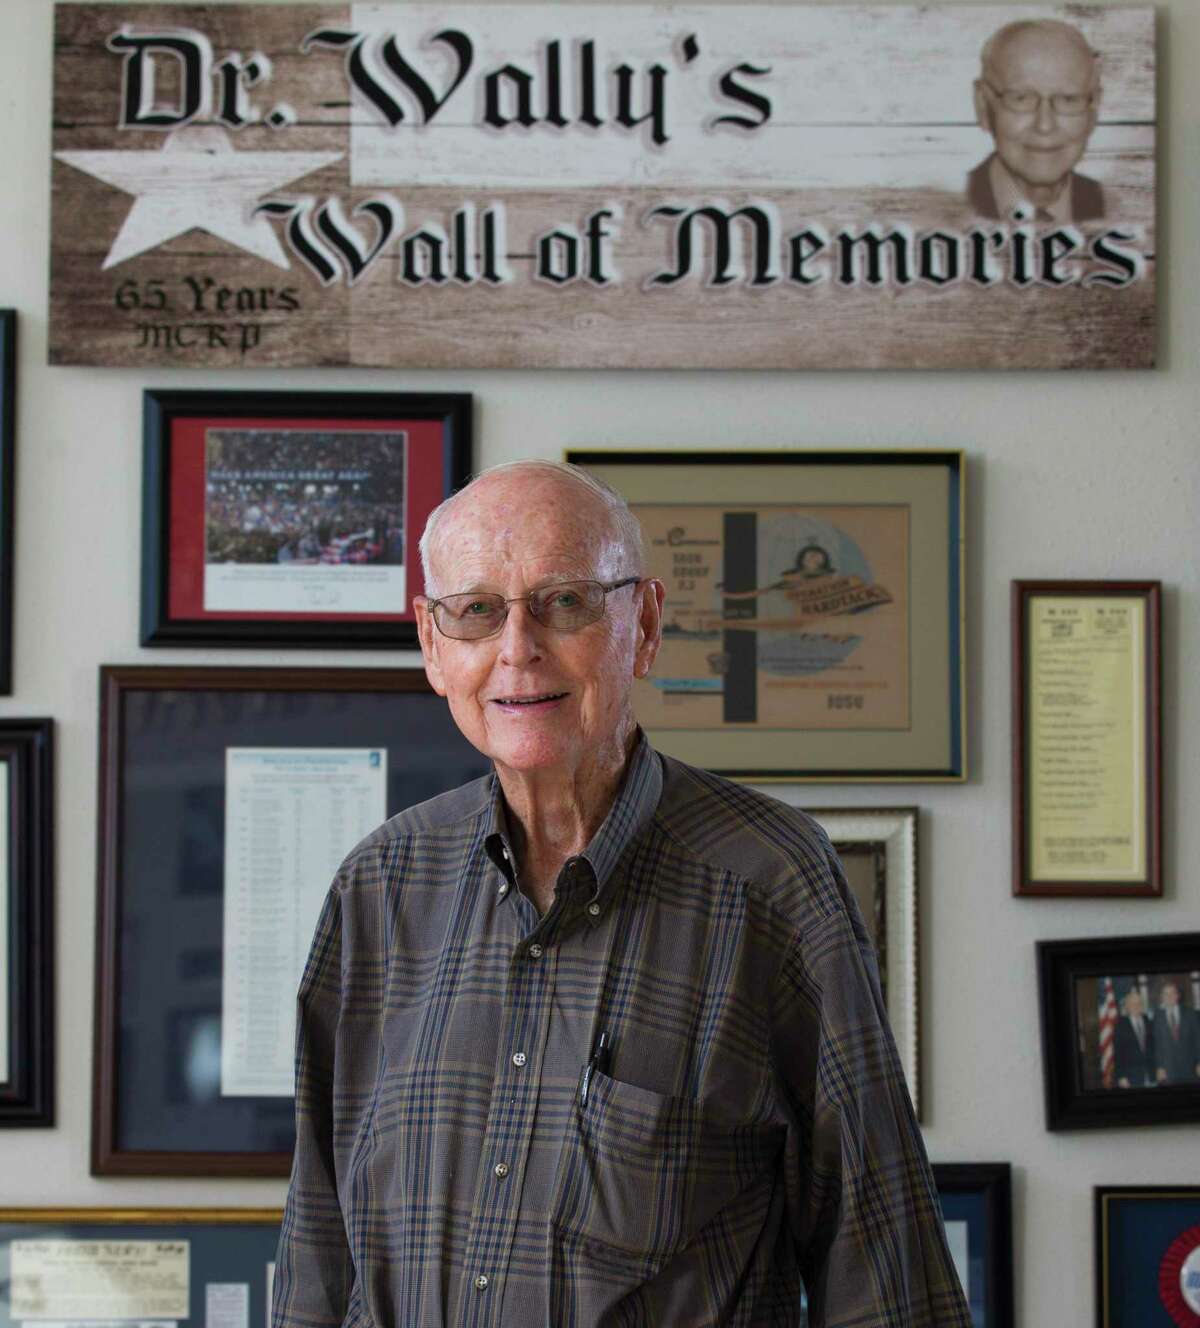 Dr. Walter “Wally” Wilkerson, who served 56 yerars as Montgomery County Republican Party chairman, poses for a portrait in front of his wall of memories at the Montgomery County Republican Headquarters, Wednesday, Dec. 5, 2018, in Conroe. Wilkerson, 91, died Friday night in Conroe.